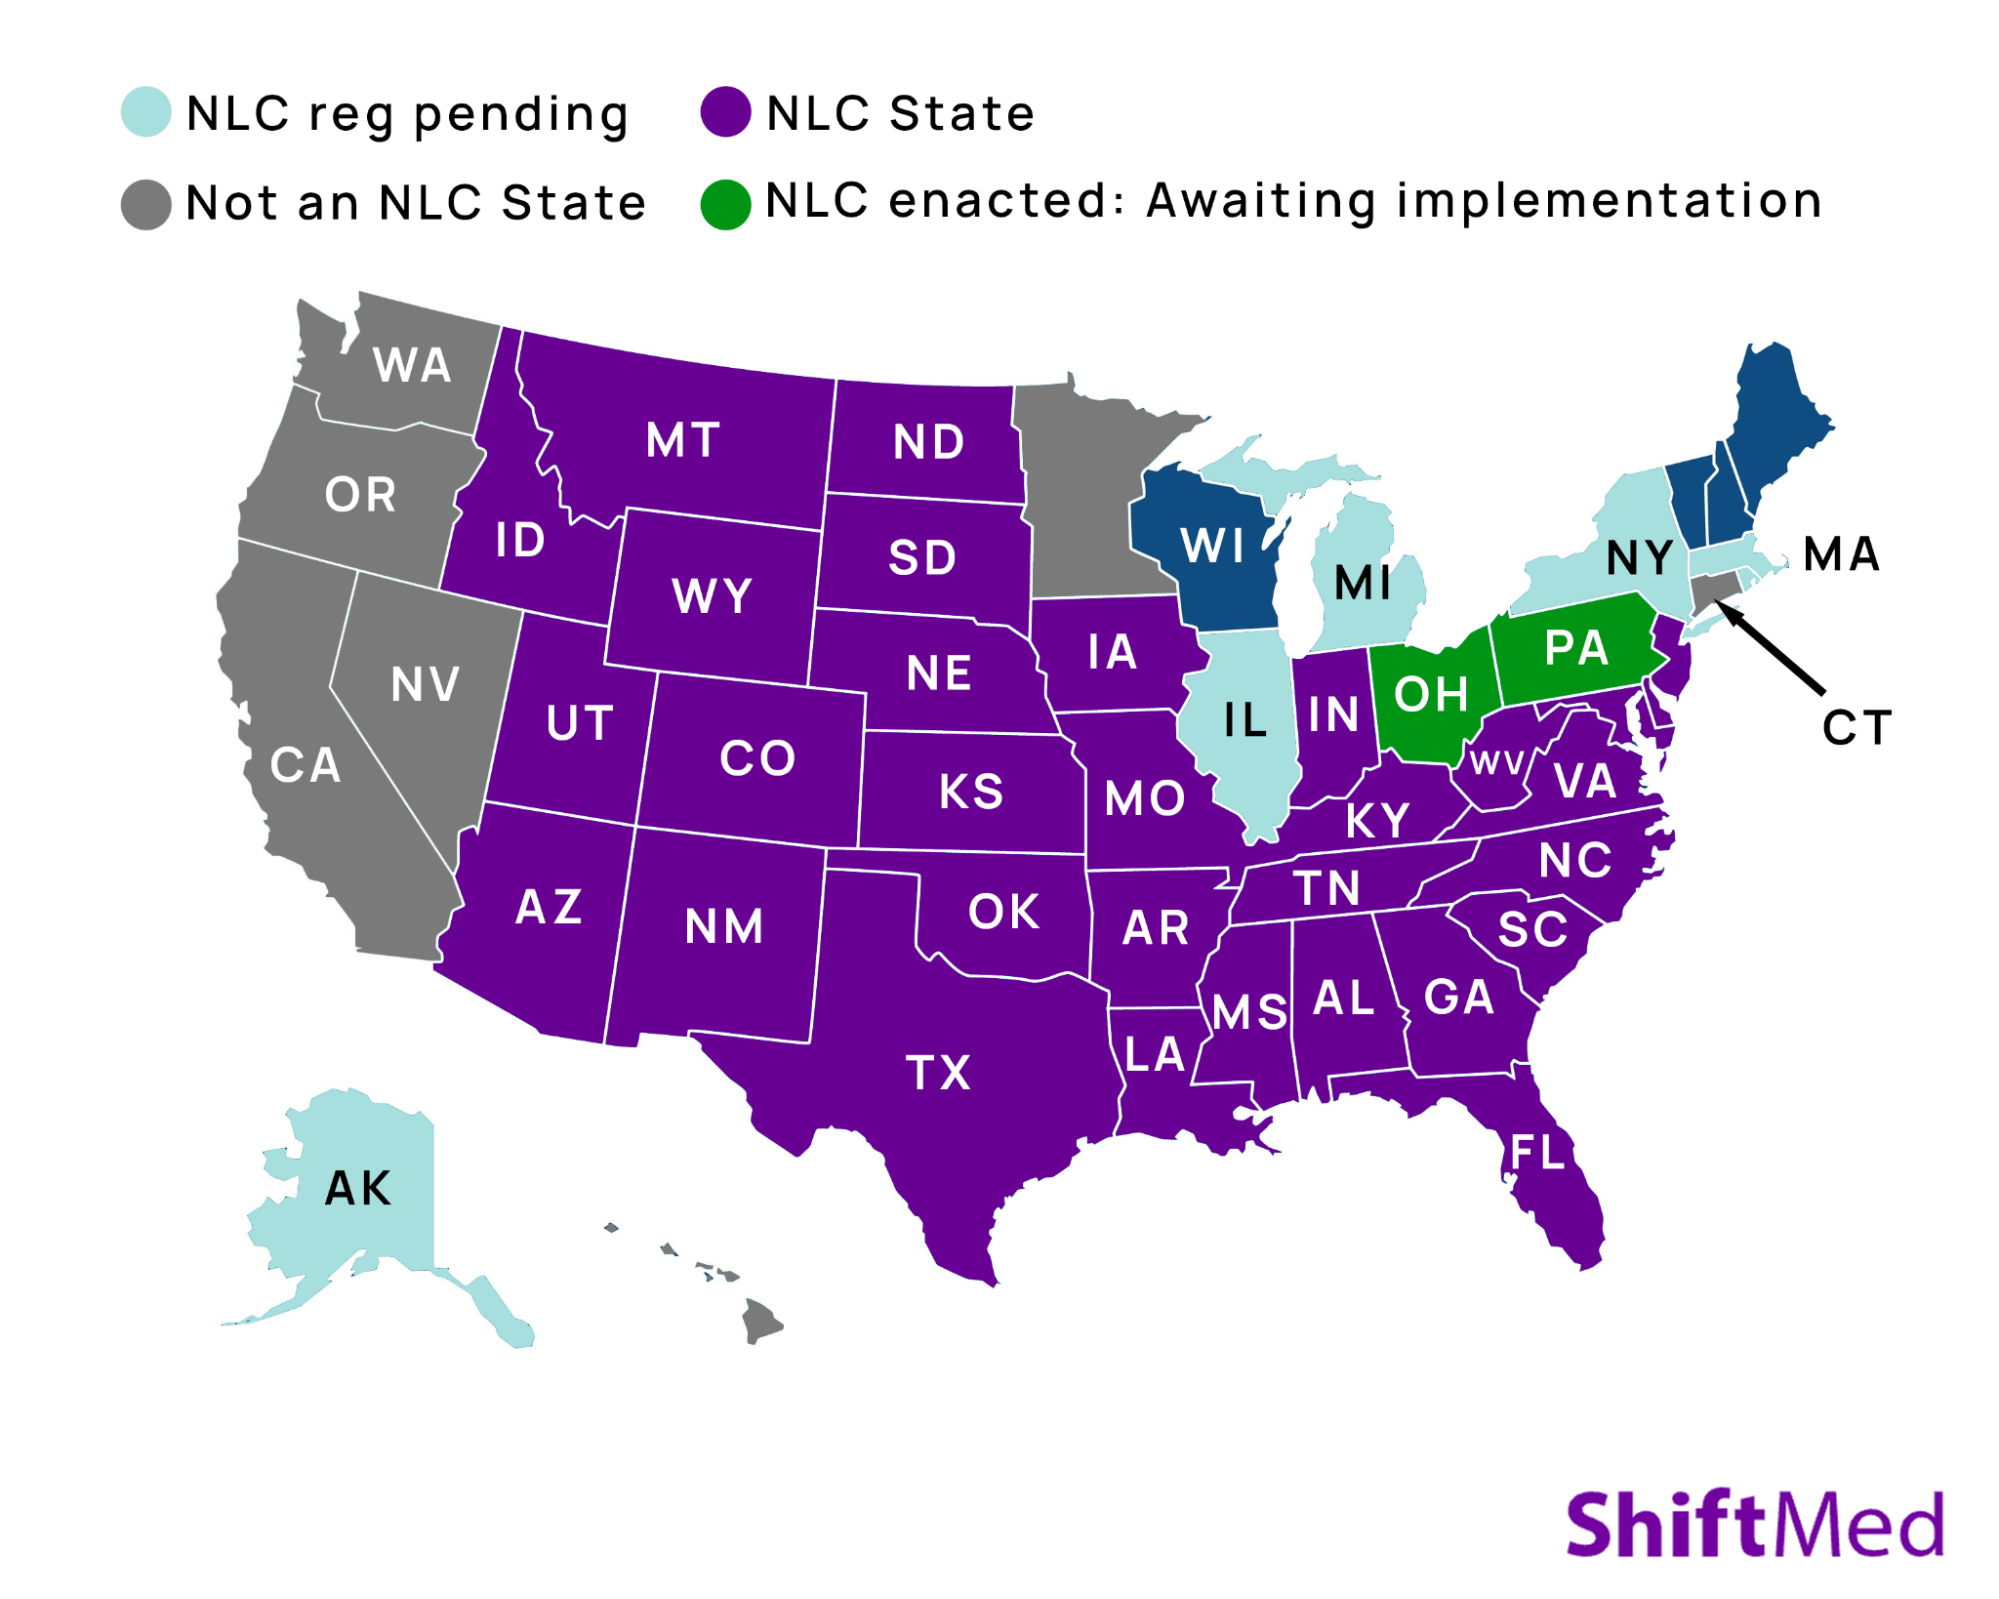 State breakdown of CNL graphic